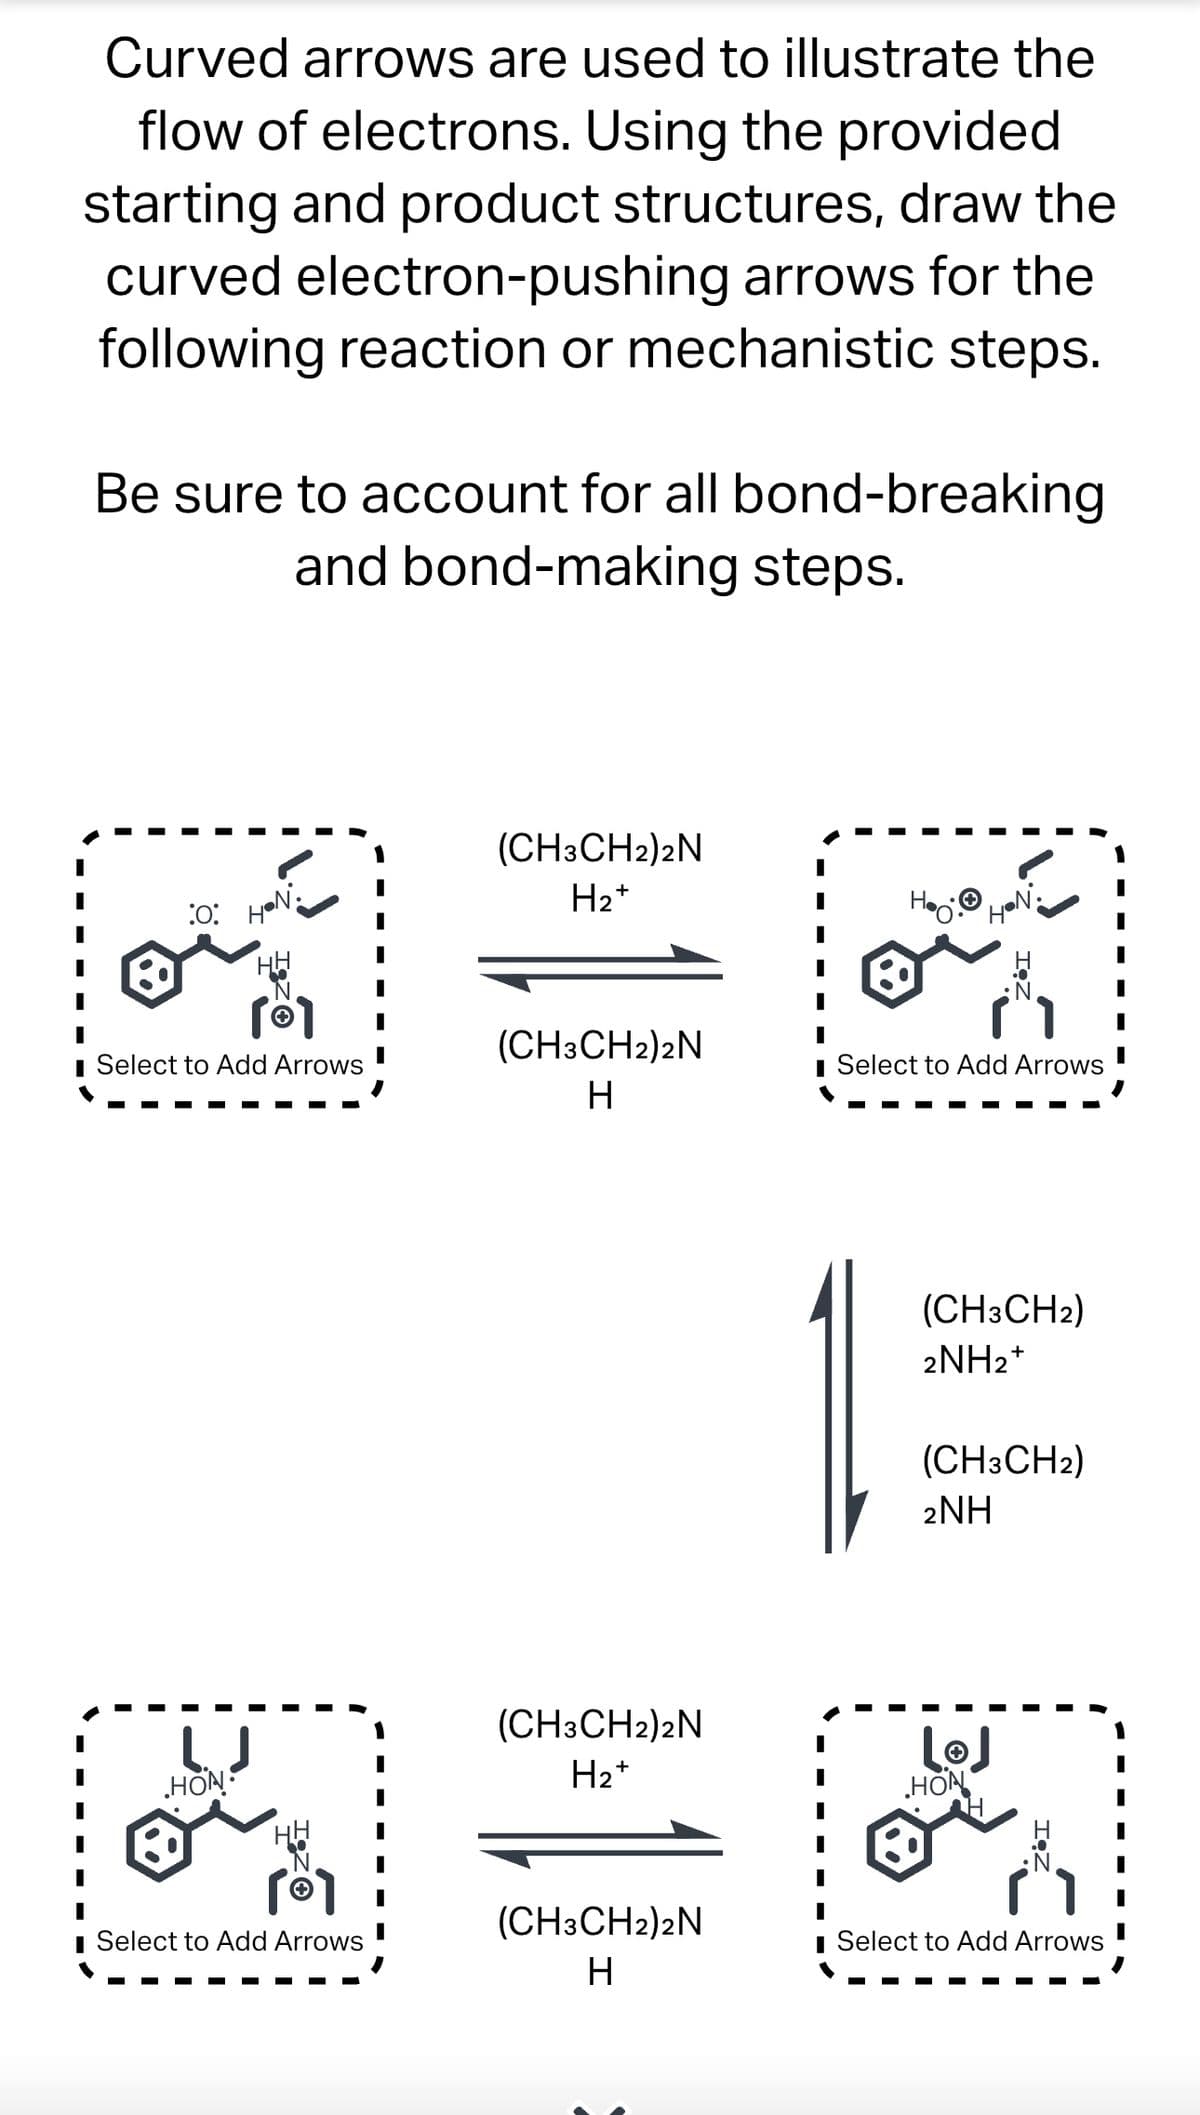 Curved arrows are used to illustrate the
flow of electrons. Using the provided
starting and product structures, draw the
curved electron-pushing arrows for the
following reaction or mechanistic steps.
Be sure to account for all bond-breaking
and bond-making steps.
:0:
HON
[Ⓡ1
■ Select to Add Arrows
HON
■ Select to Add Arrows
(CH3CH2)2N
H₂+
(CH3CH2)2N
H
(CH3CH2)2N
H₂+
(CH3CH2)2N
H
H.Ⓒ
HON
■ Select to Add Arrows
(CH3CH2)
2NH₂+
15
(CH3CH2)
2NH
لها
HON
Select to Add Arrows